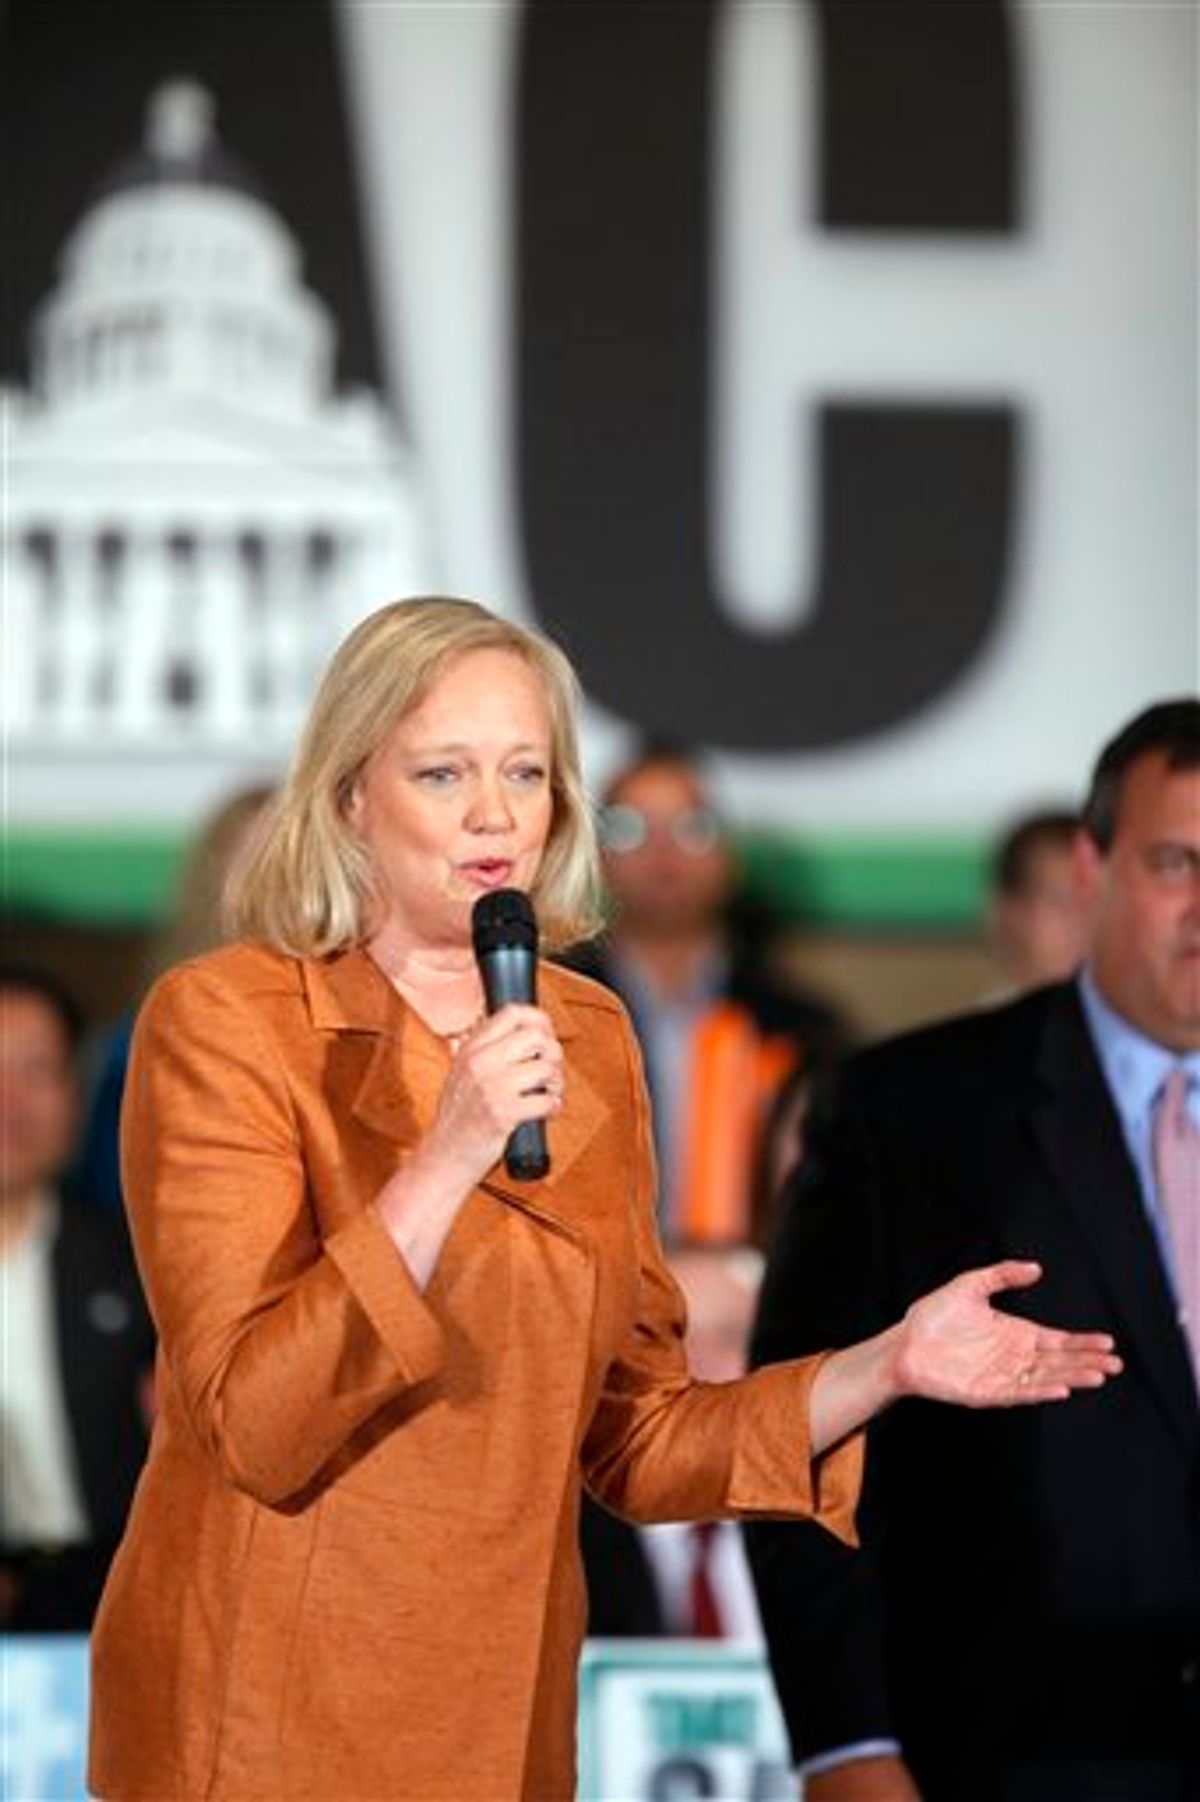 Meg Whitman, Republican nominee for Governor, holds a campaign event with New Jersey Governor Chris Christie, right, on Wednesday, Sept. 22, 2010, in Los Angeles. (AP Photo/Damian Dovarganes)    (AP)